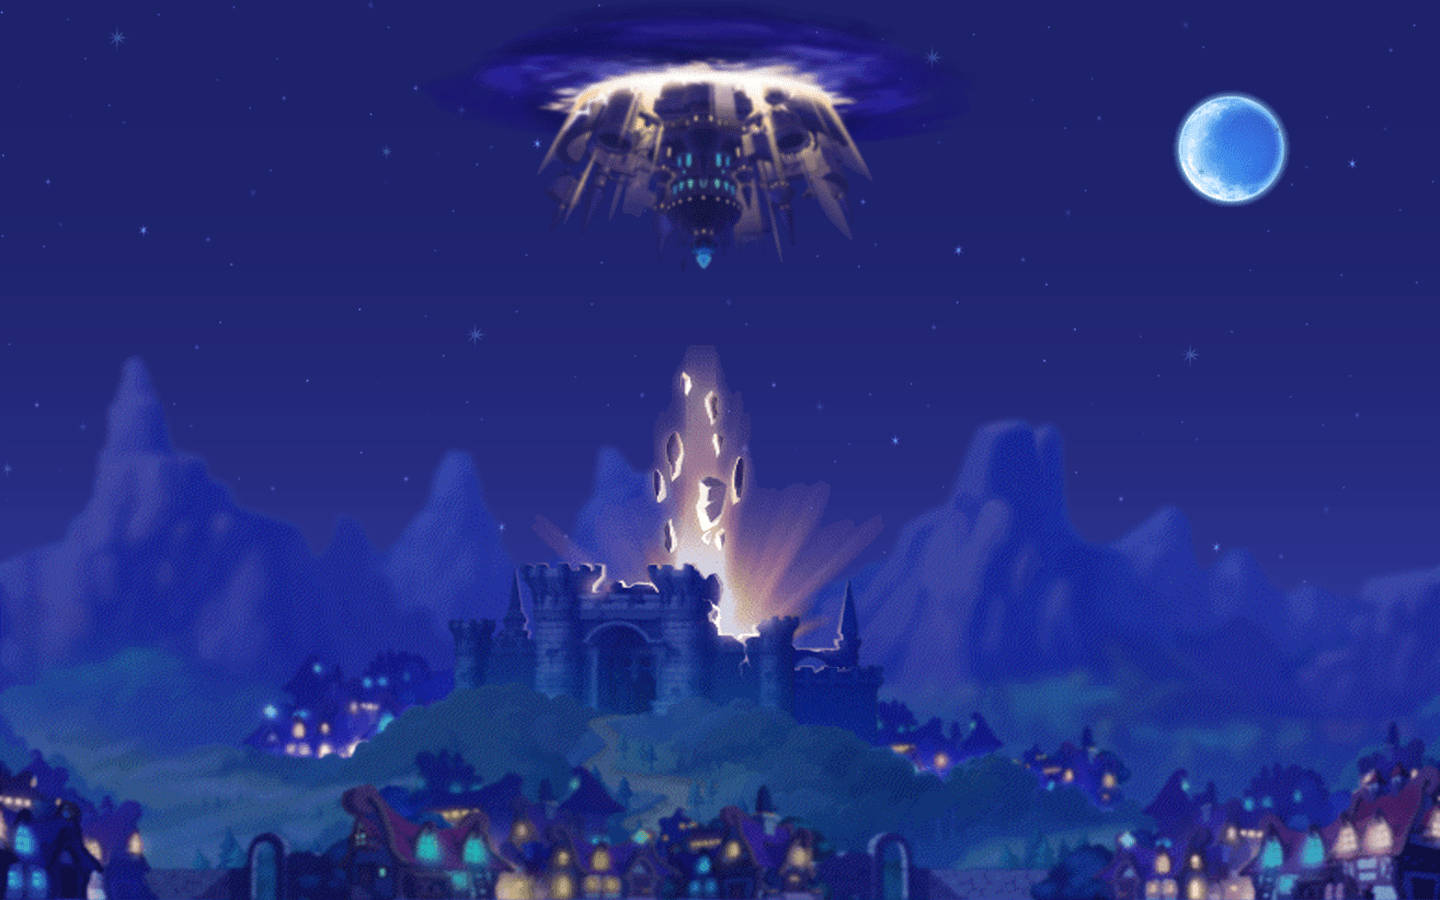 Official Videos and Screenshots | MapleStory